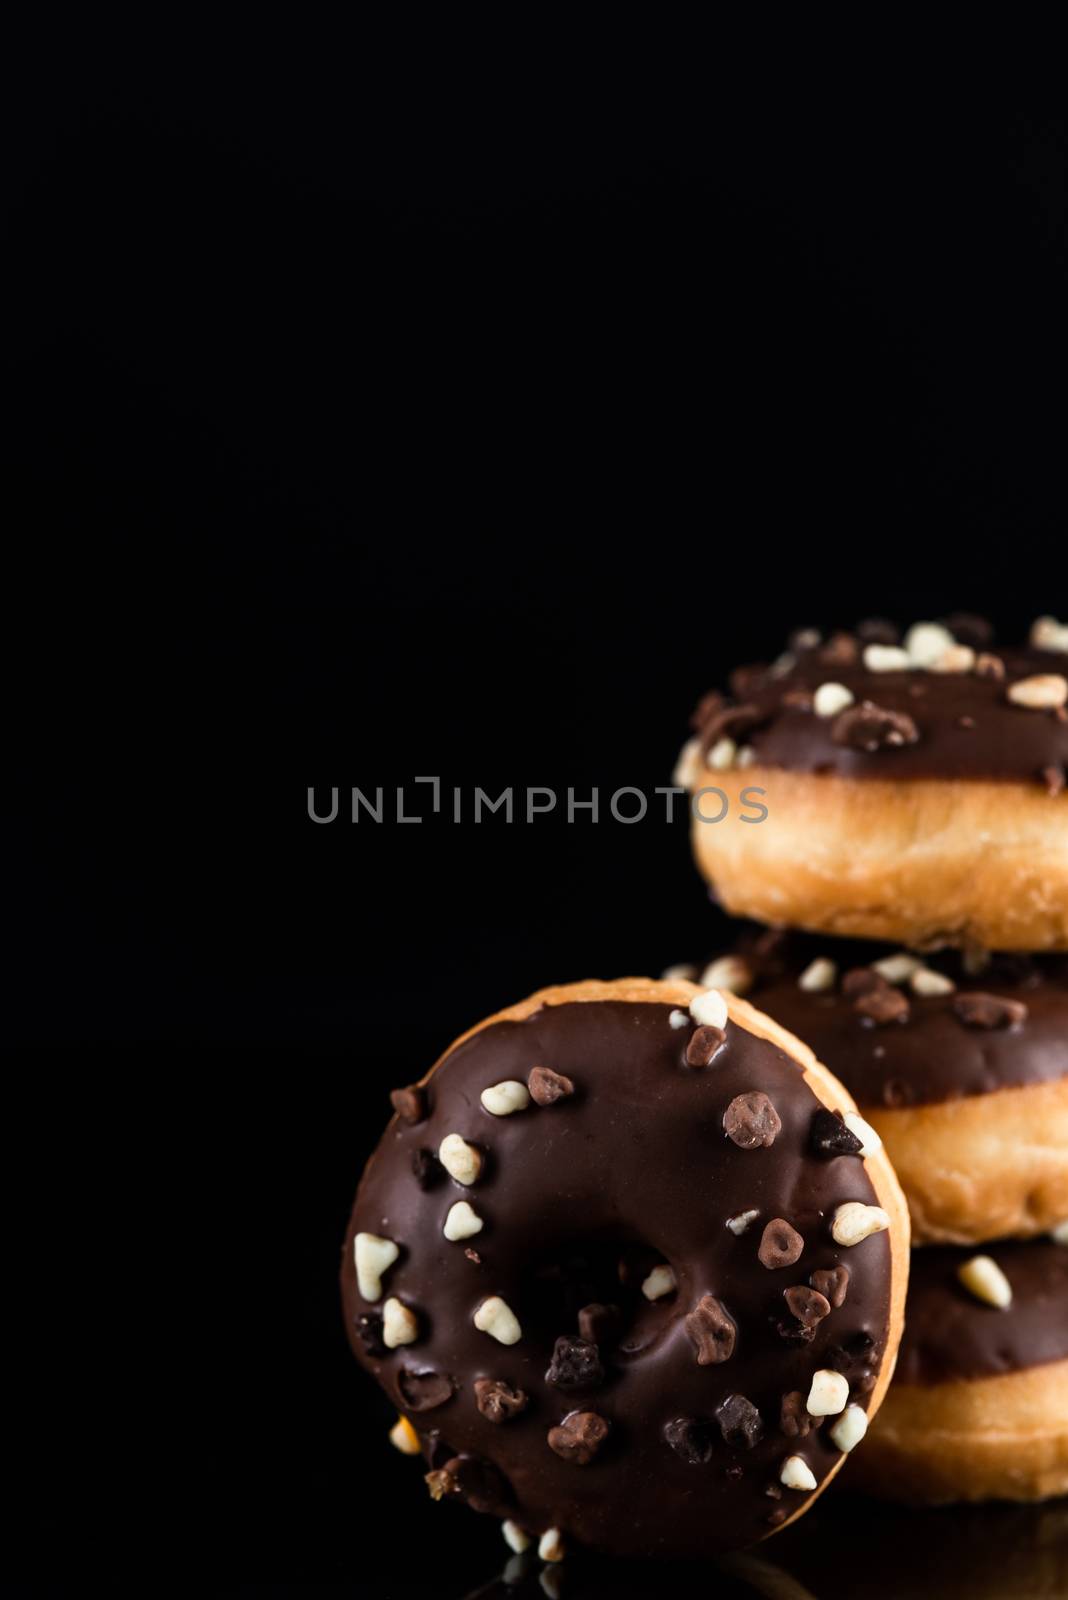 Stack of Chocolate Donuts or Doughnuts on Black Background with  by merc67